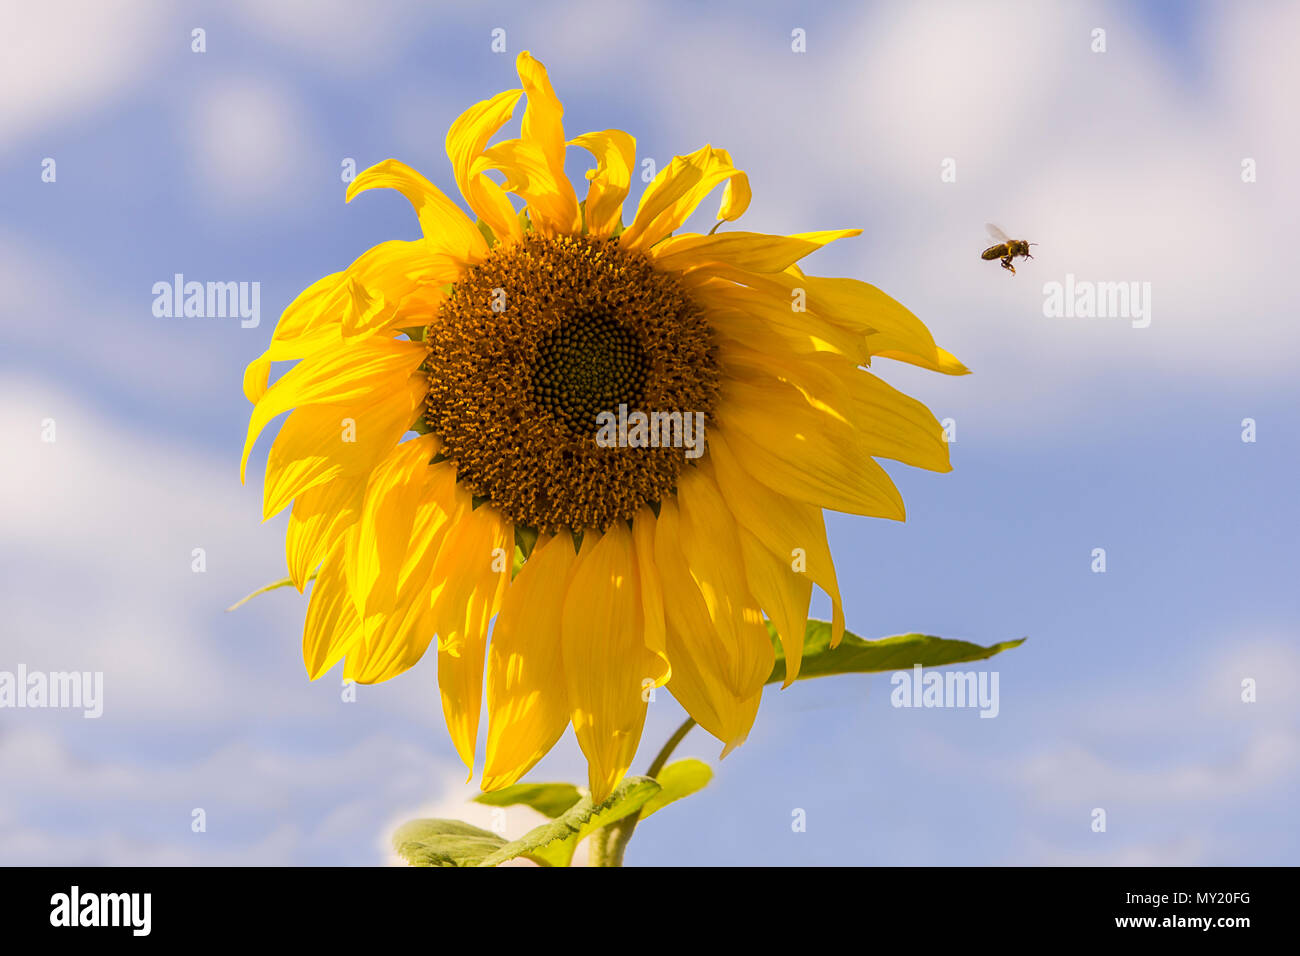 A bee flying near a sunflower with a blue and cloudy sky on sunny summer day Stock Photo